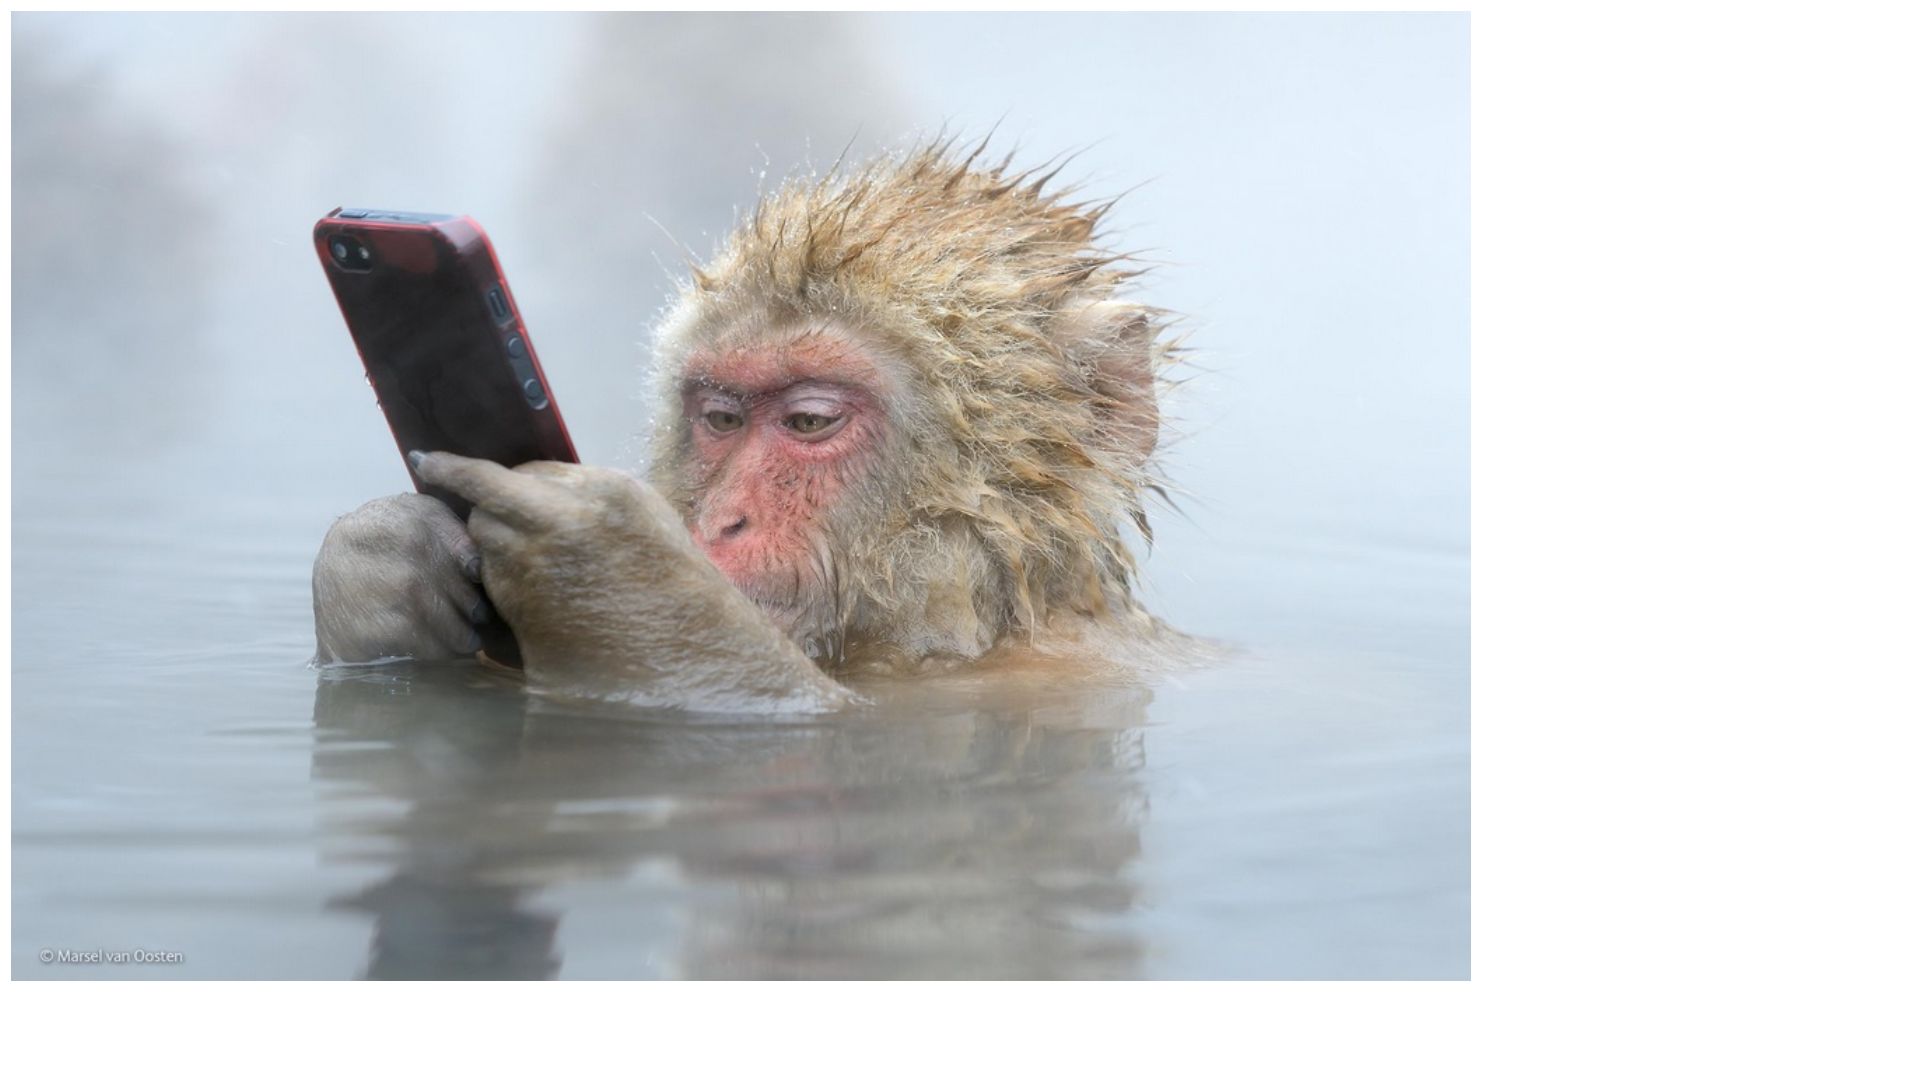 monkey in a hot tub with iphone Blank Meme Template